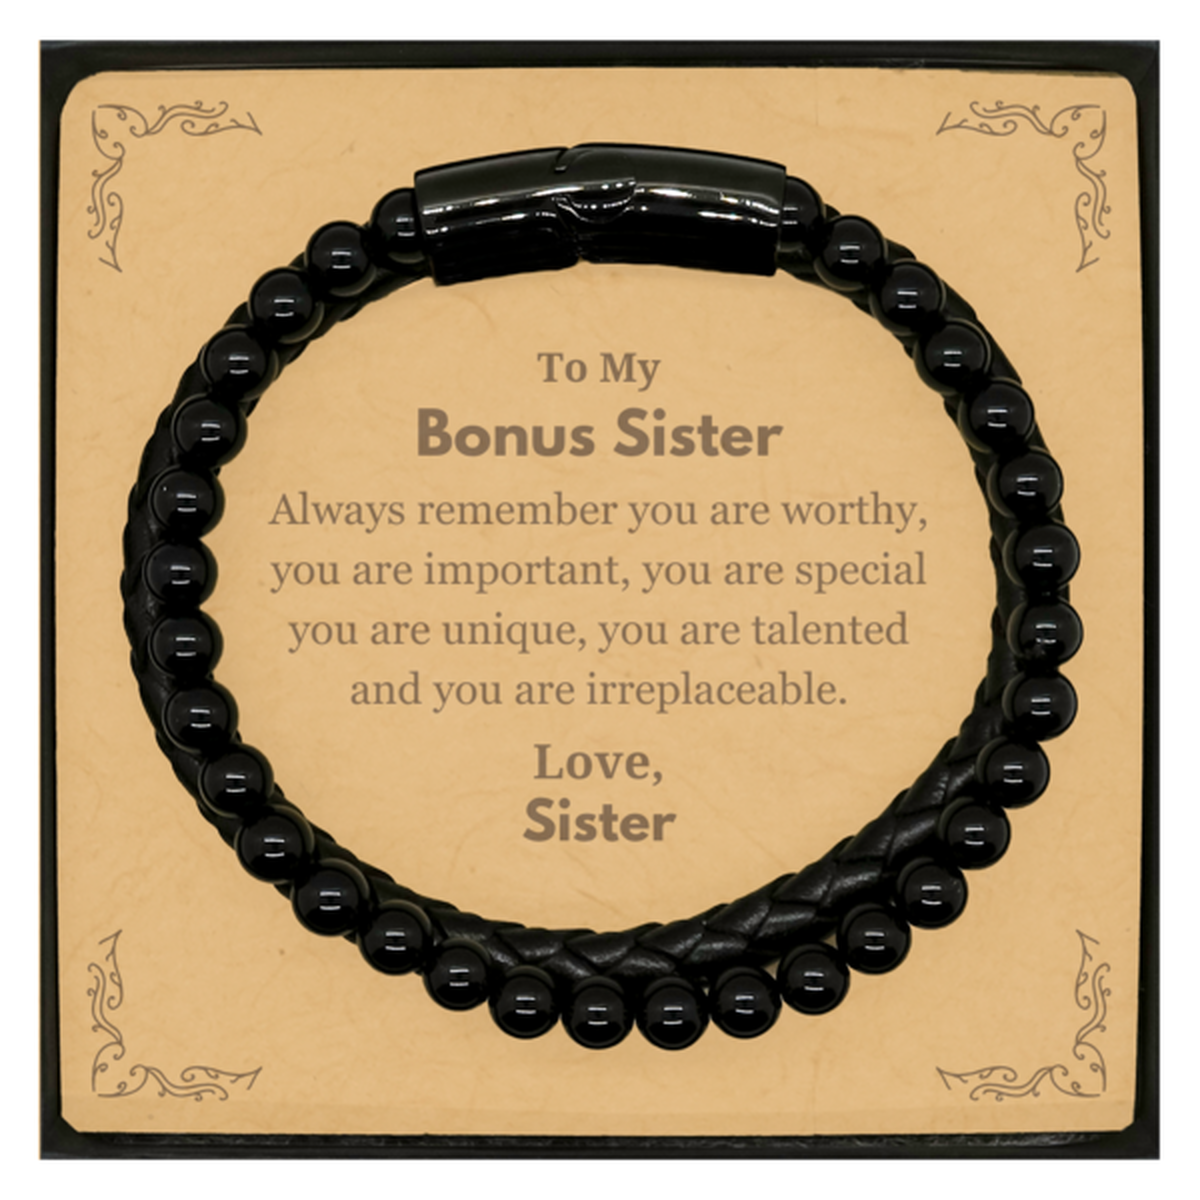 Bonus Sister Birthday Gifts from Sister, Inspirational Stone Leather Bracelets for Bonus Sister Christmas Graduation Gifts for Bonus Sister Always remember you are worthy, you are important. Love, Sister